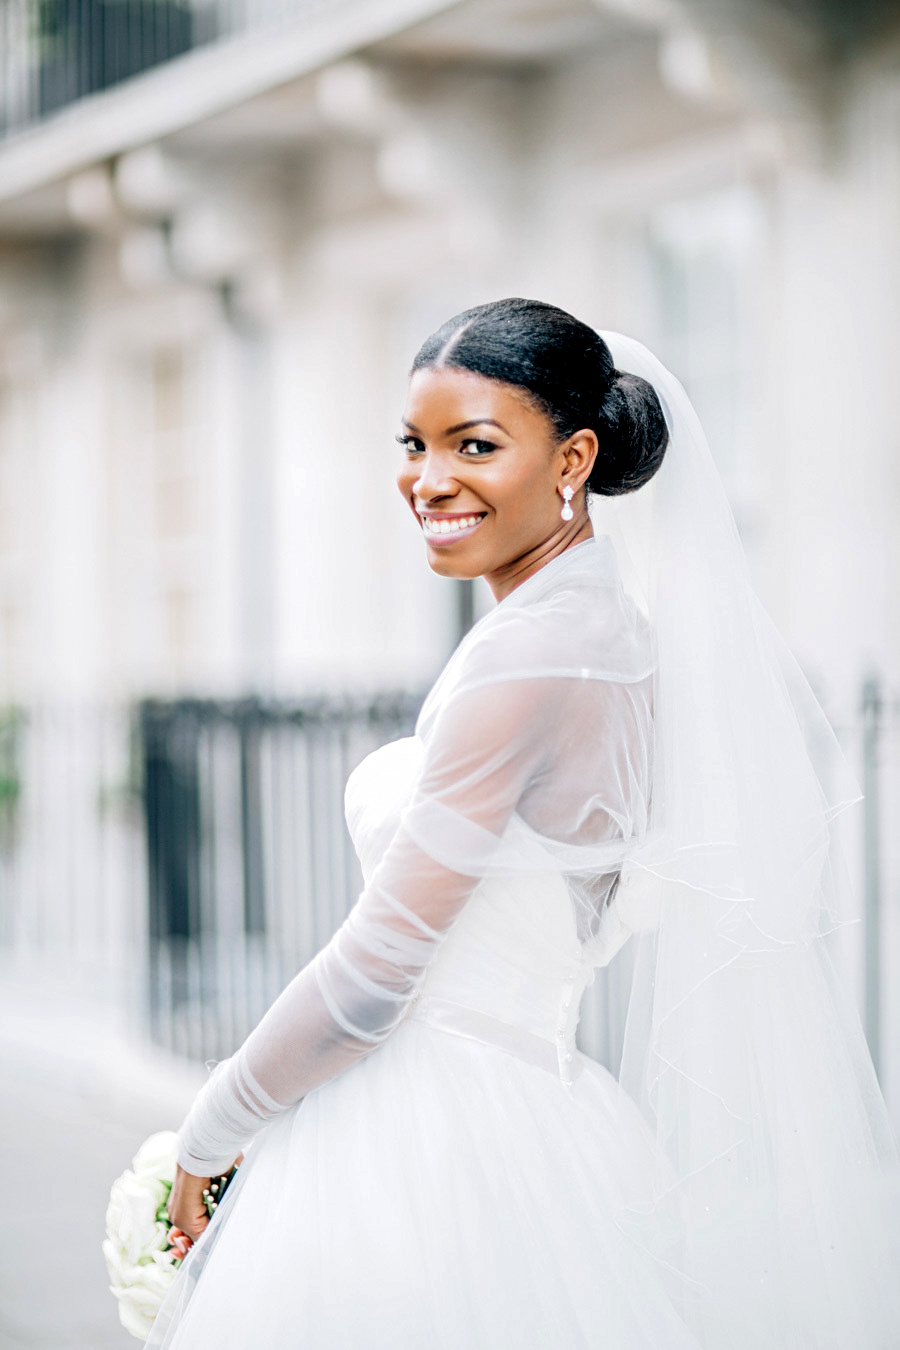 the best hairstyles for every wedding dress neckline